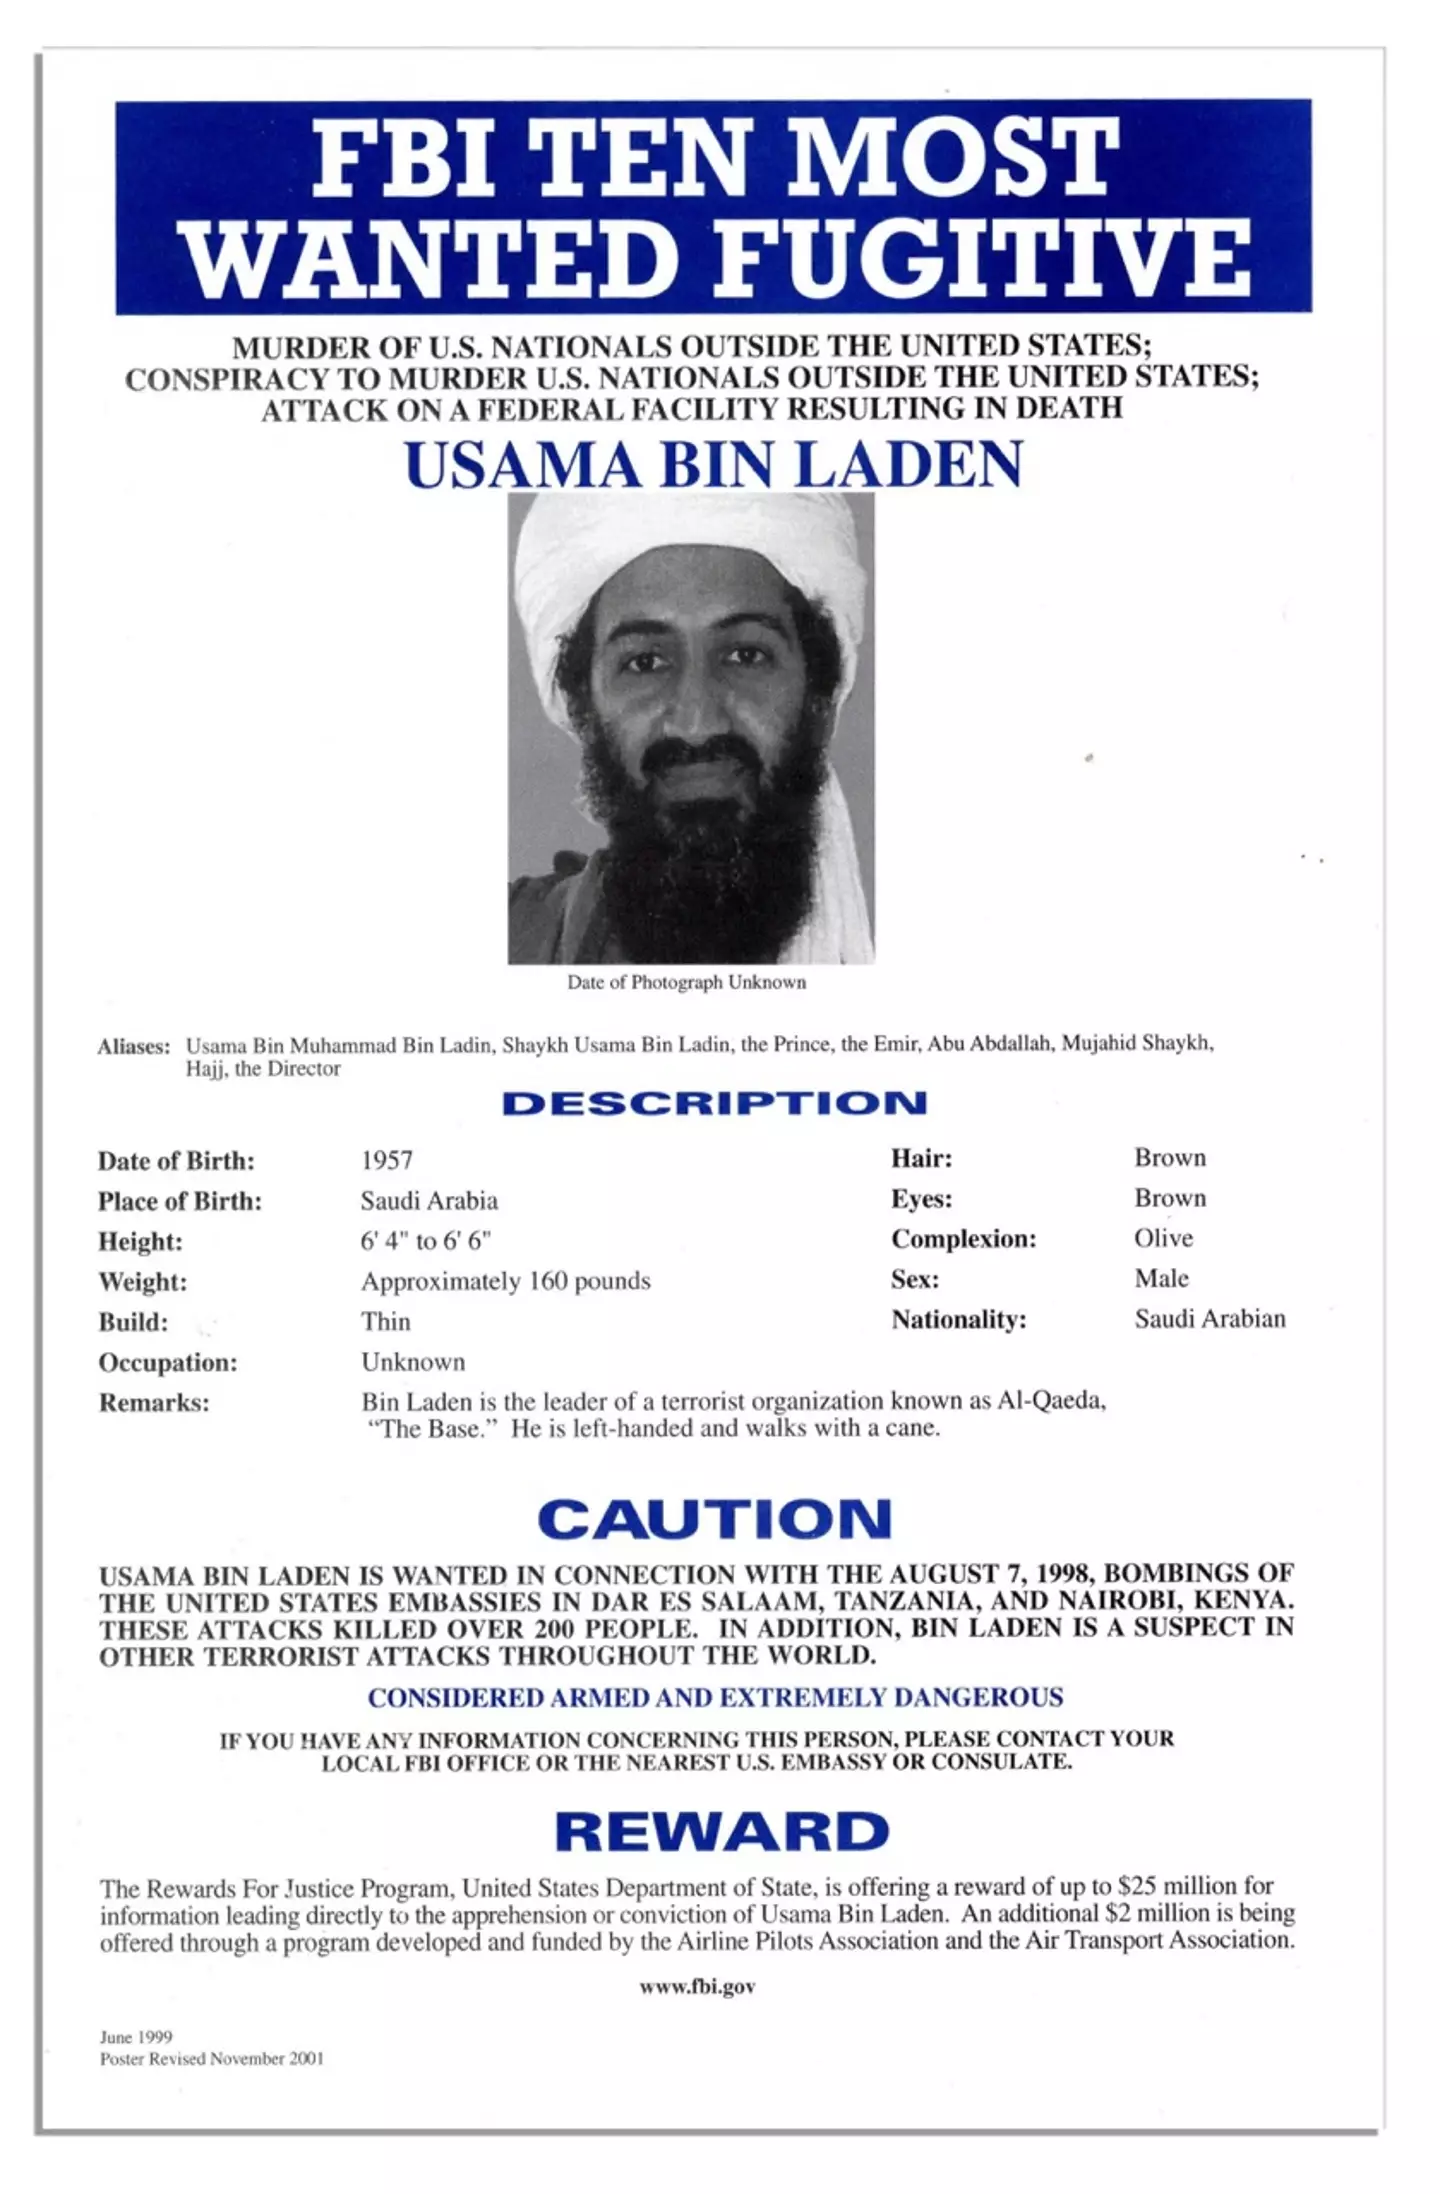 Top Ten Most Wanted notice issued by the FBI for Osama Bin Laden.